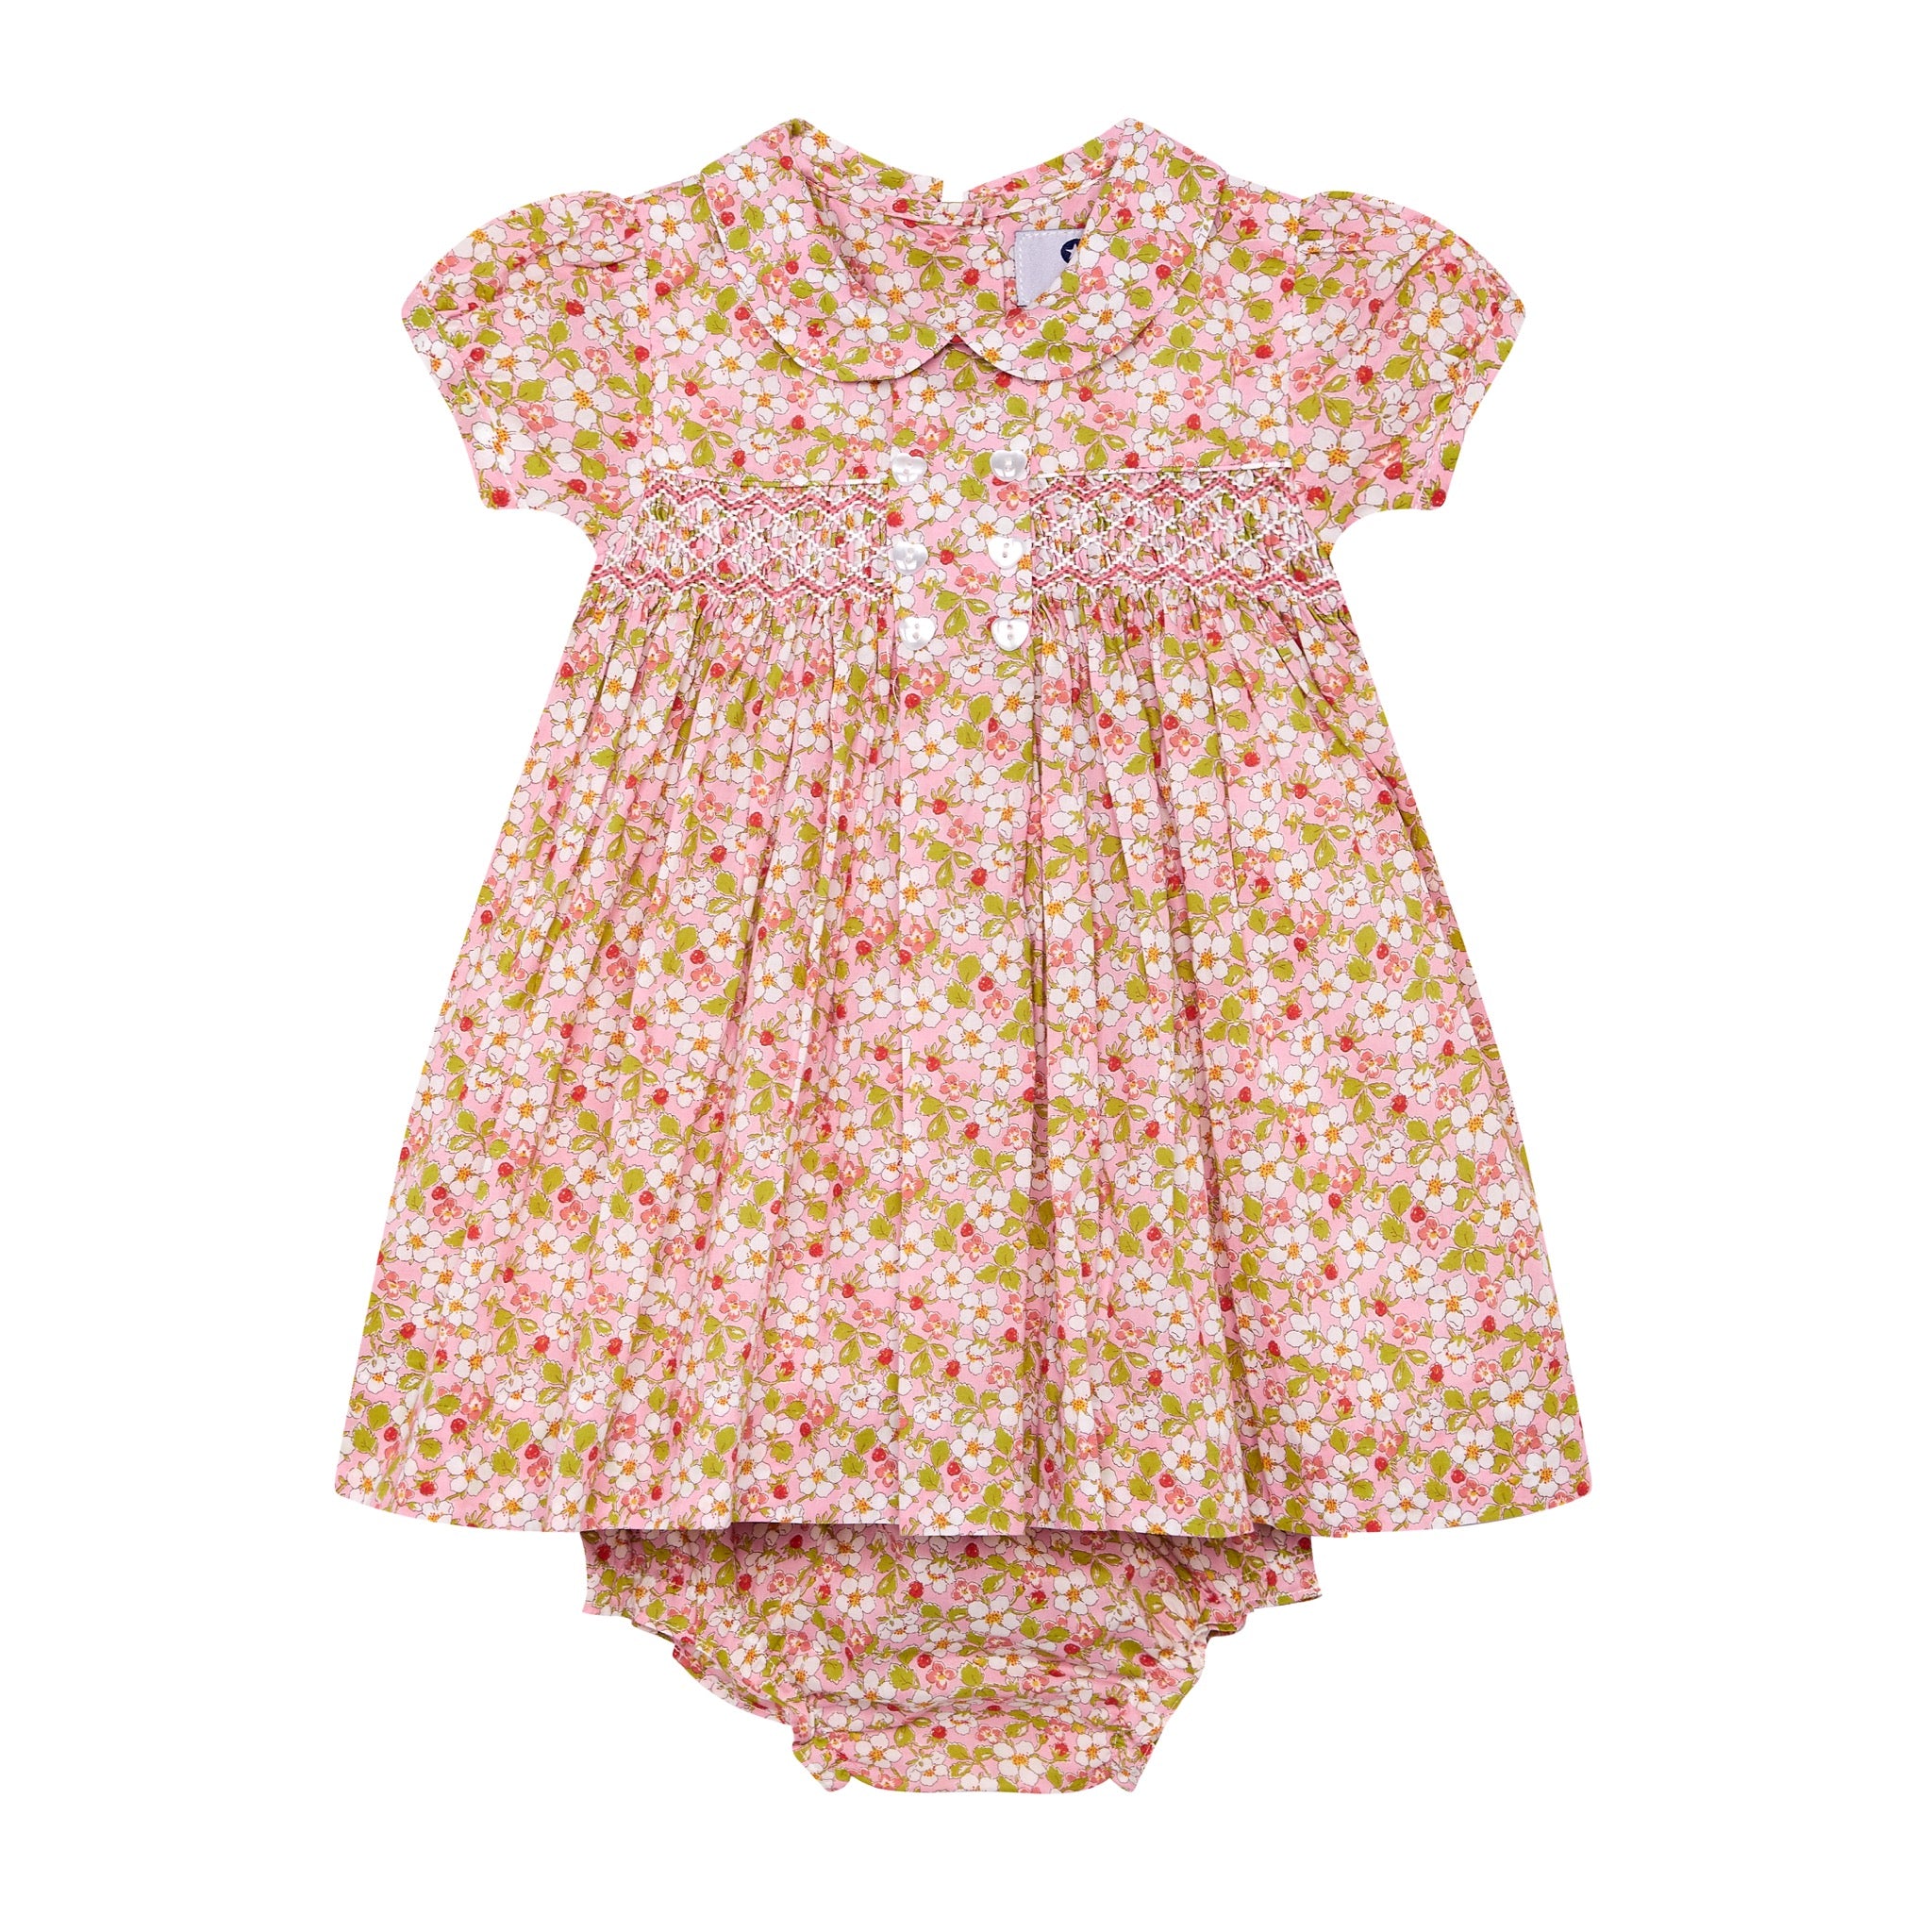 hand smocked baby dress made from Liberty fabric